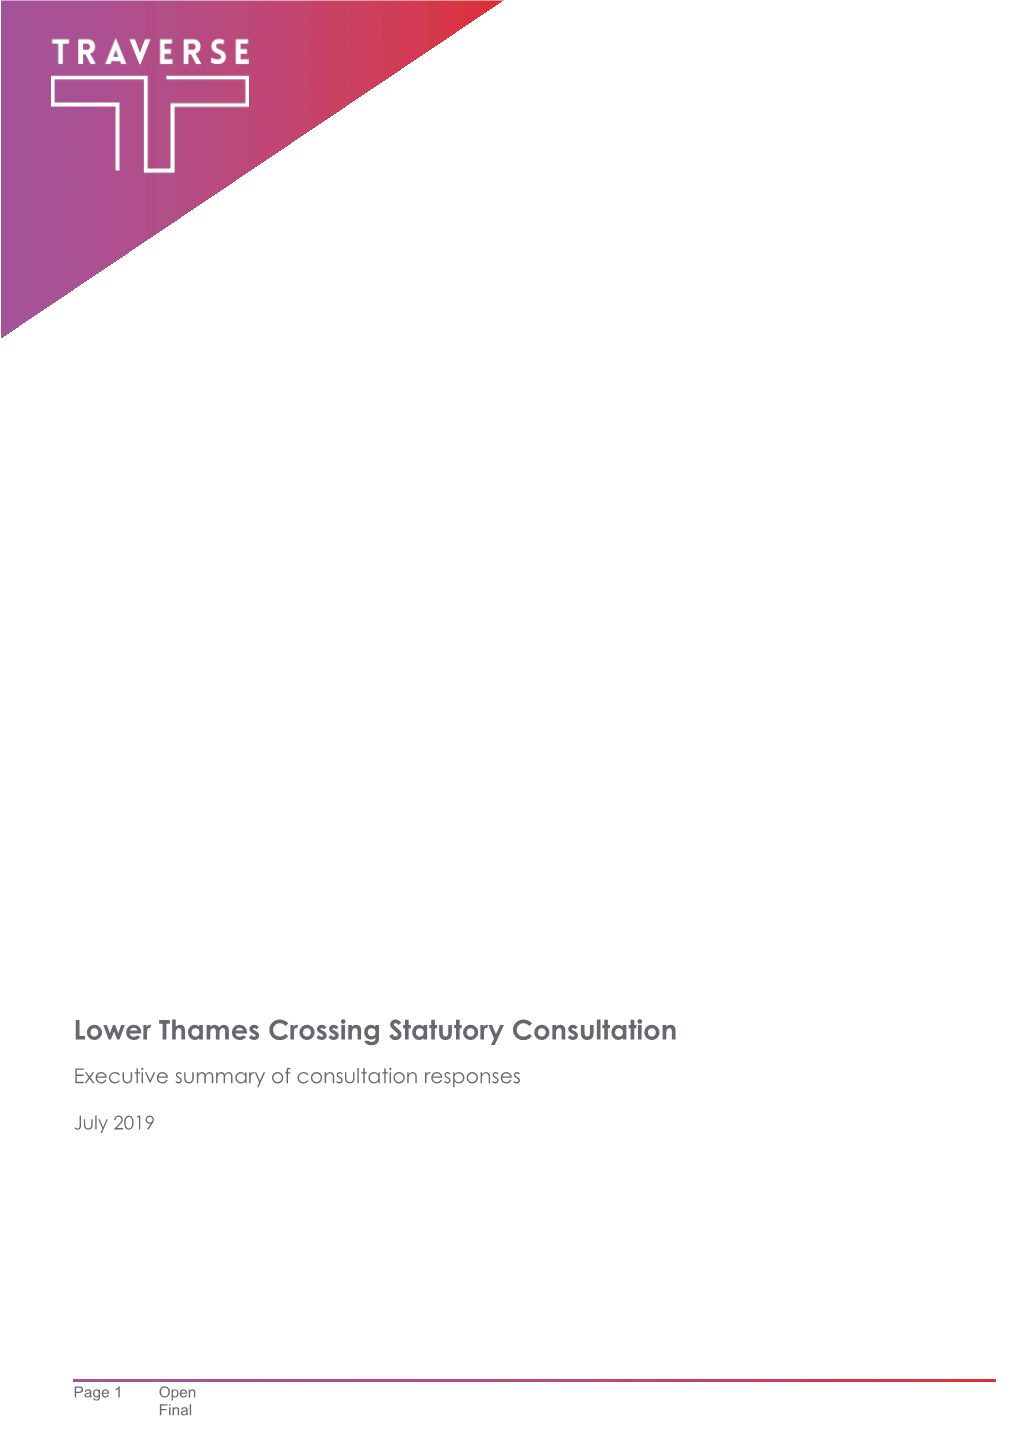 Lower Thames Crossing Statutory Consultation Executive Summary of Consultation Responses